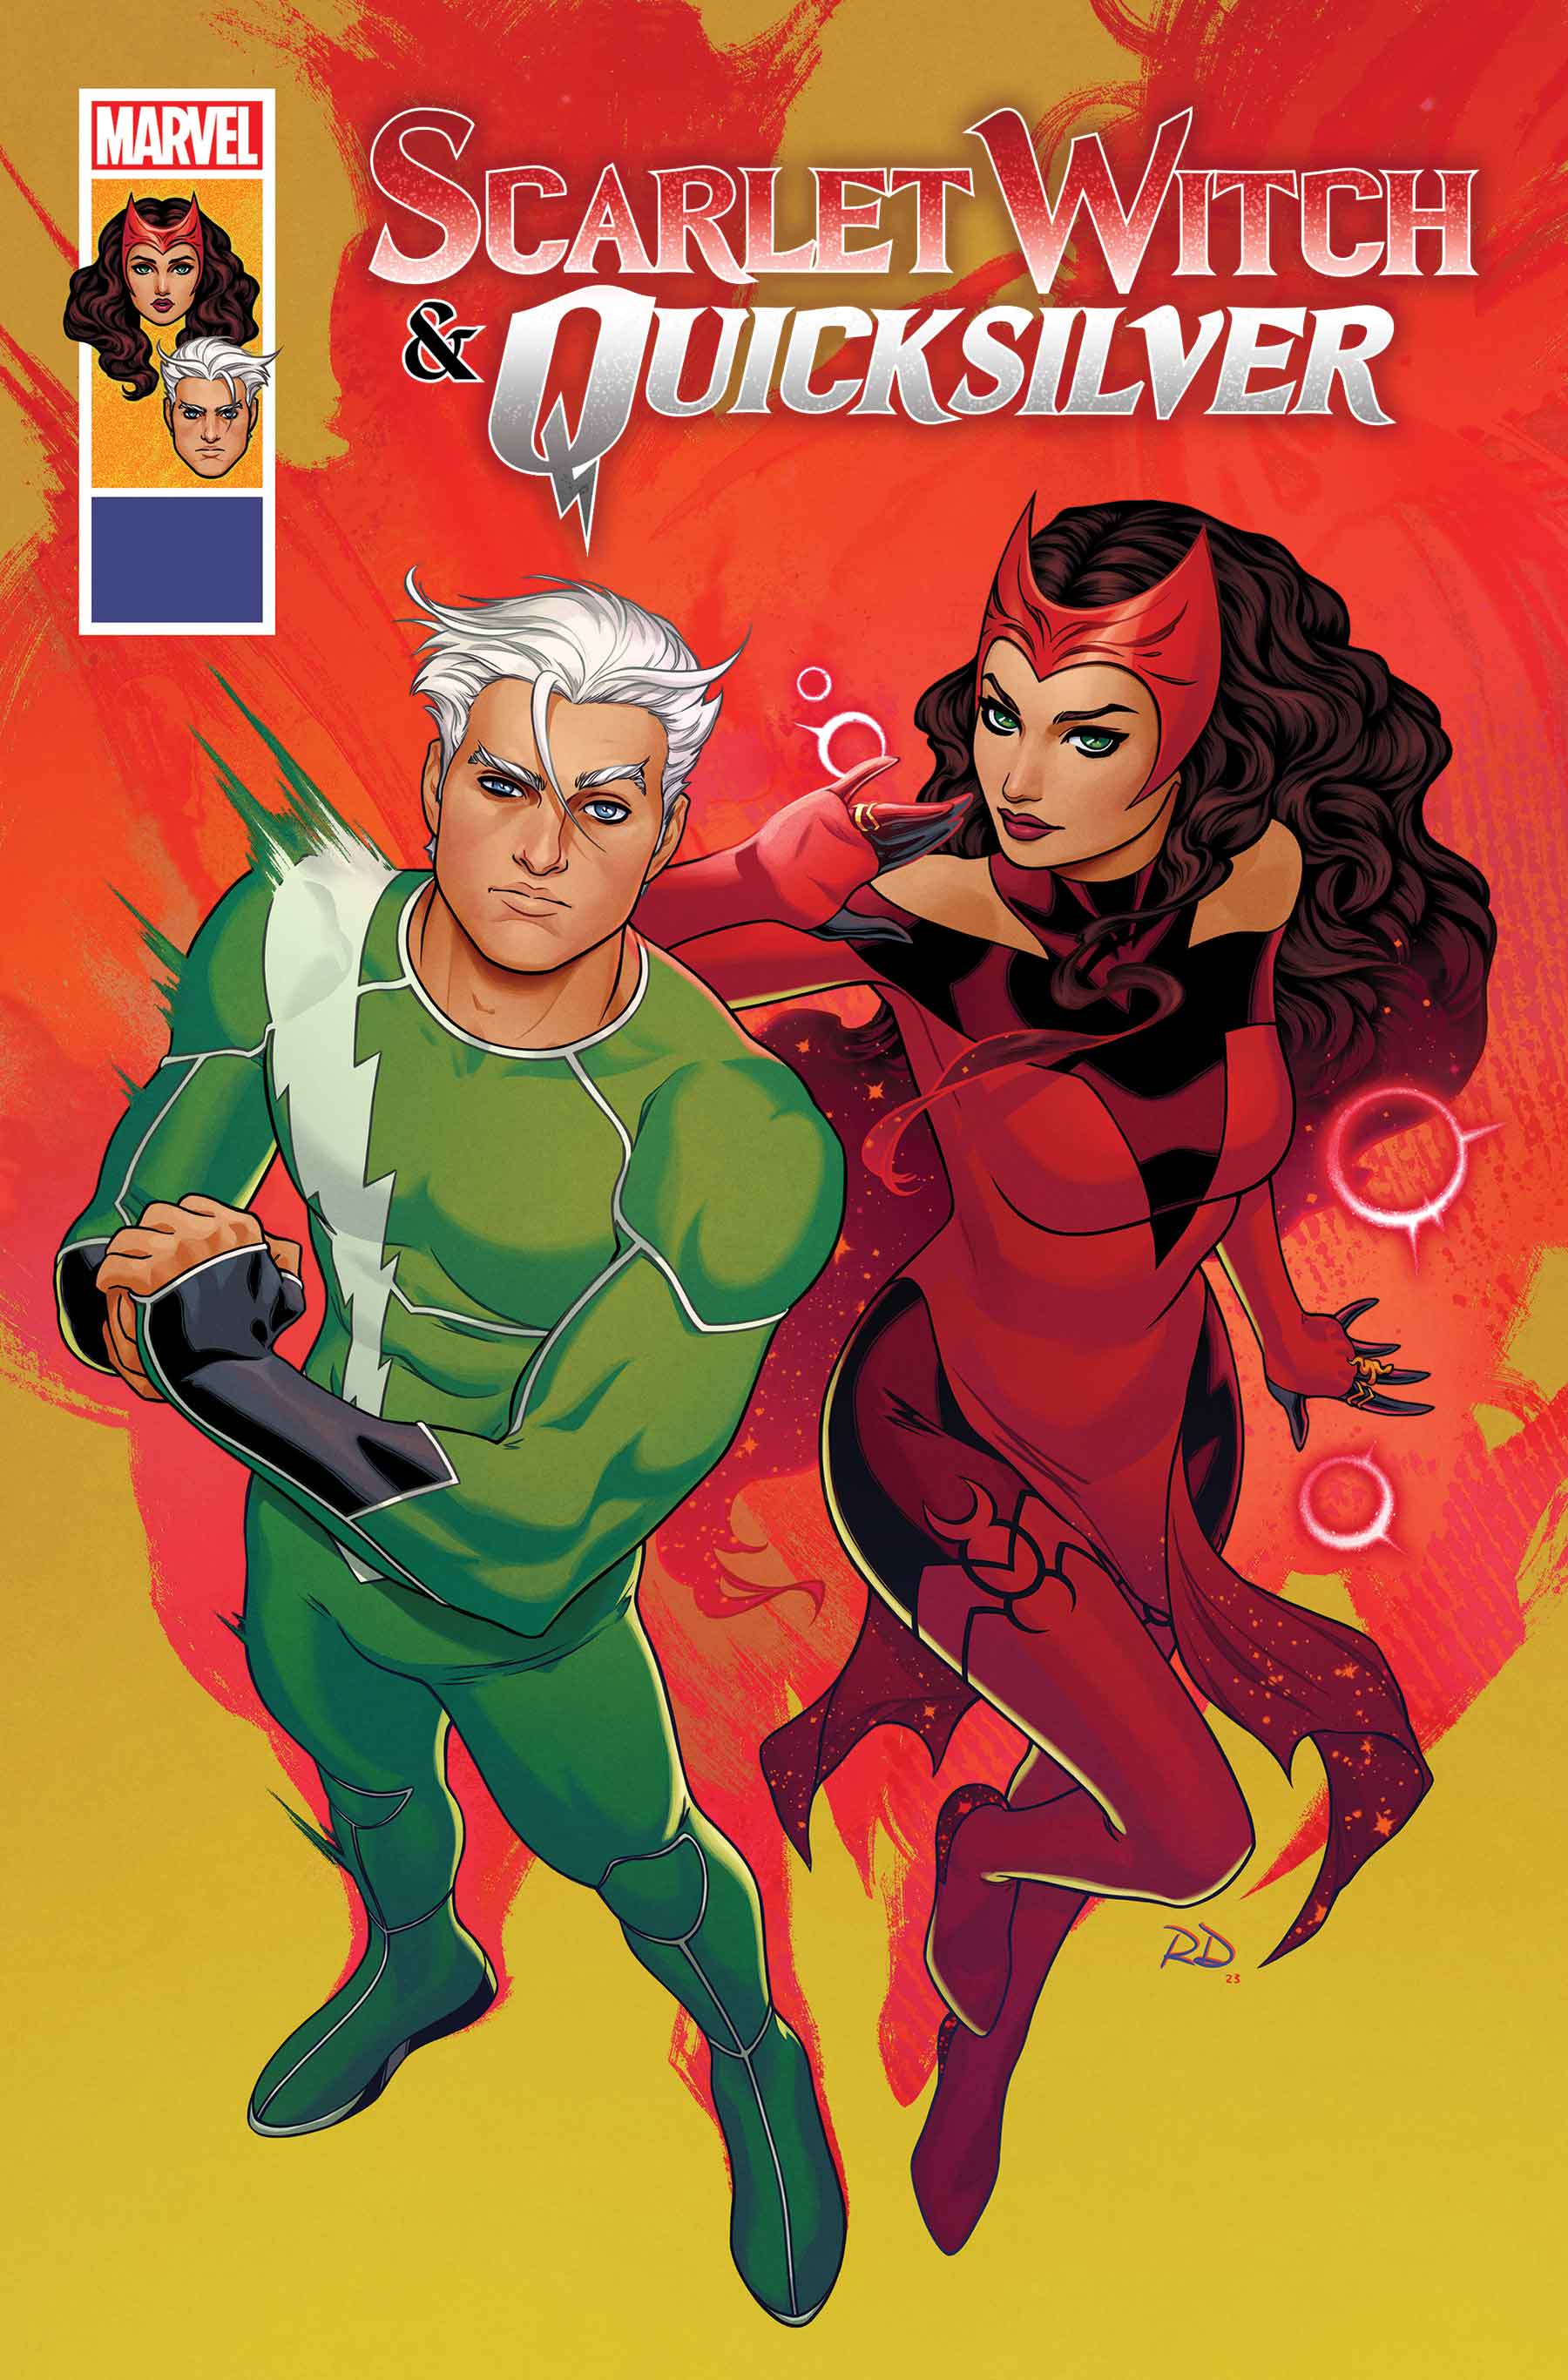 NYCC 2023: New 'Scarlet Witch & Quicksilver' Comic Series Announced